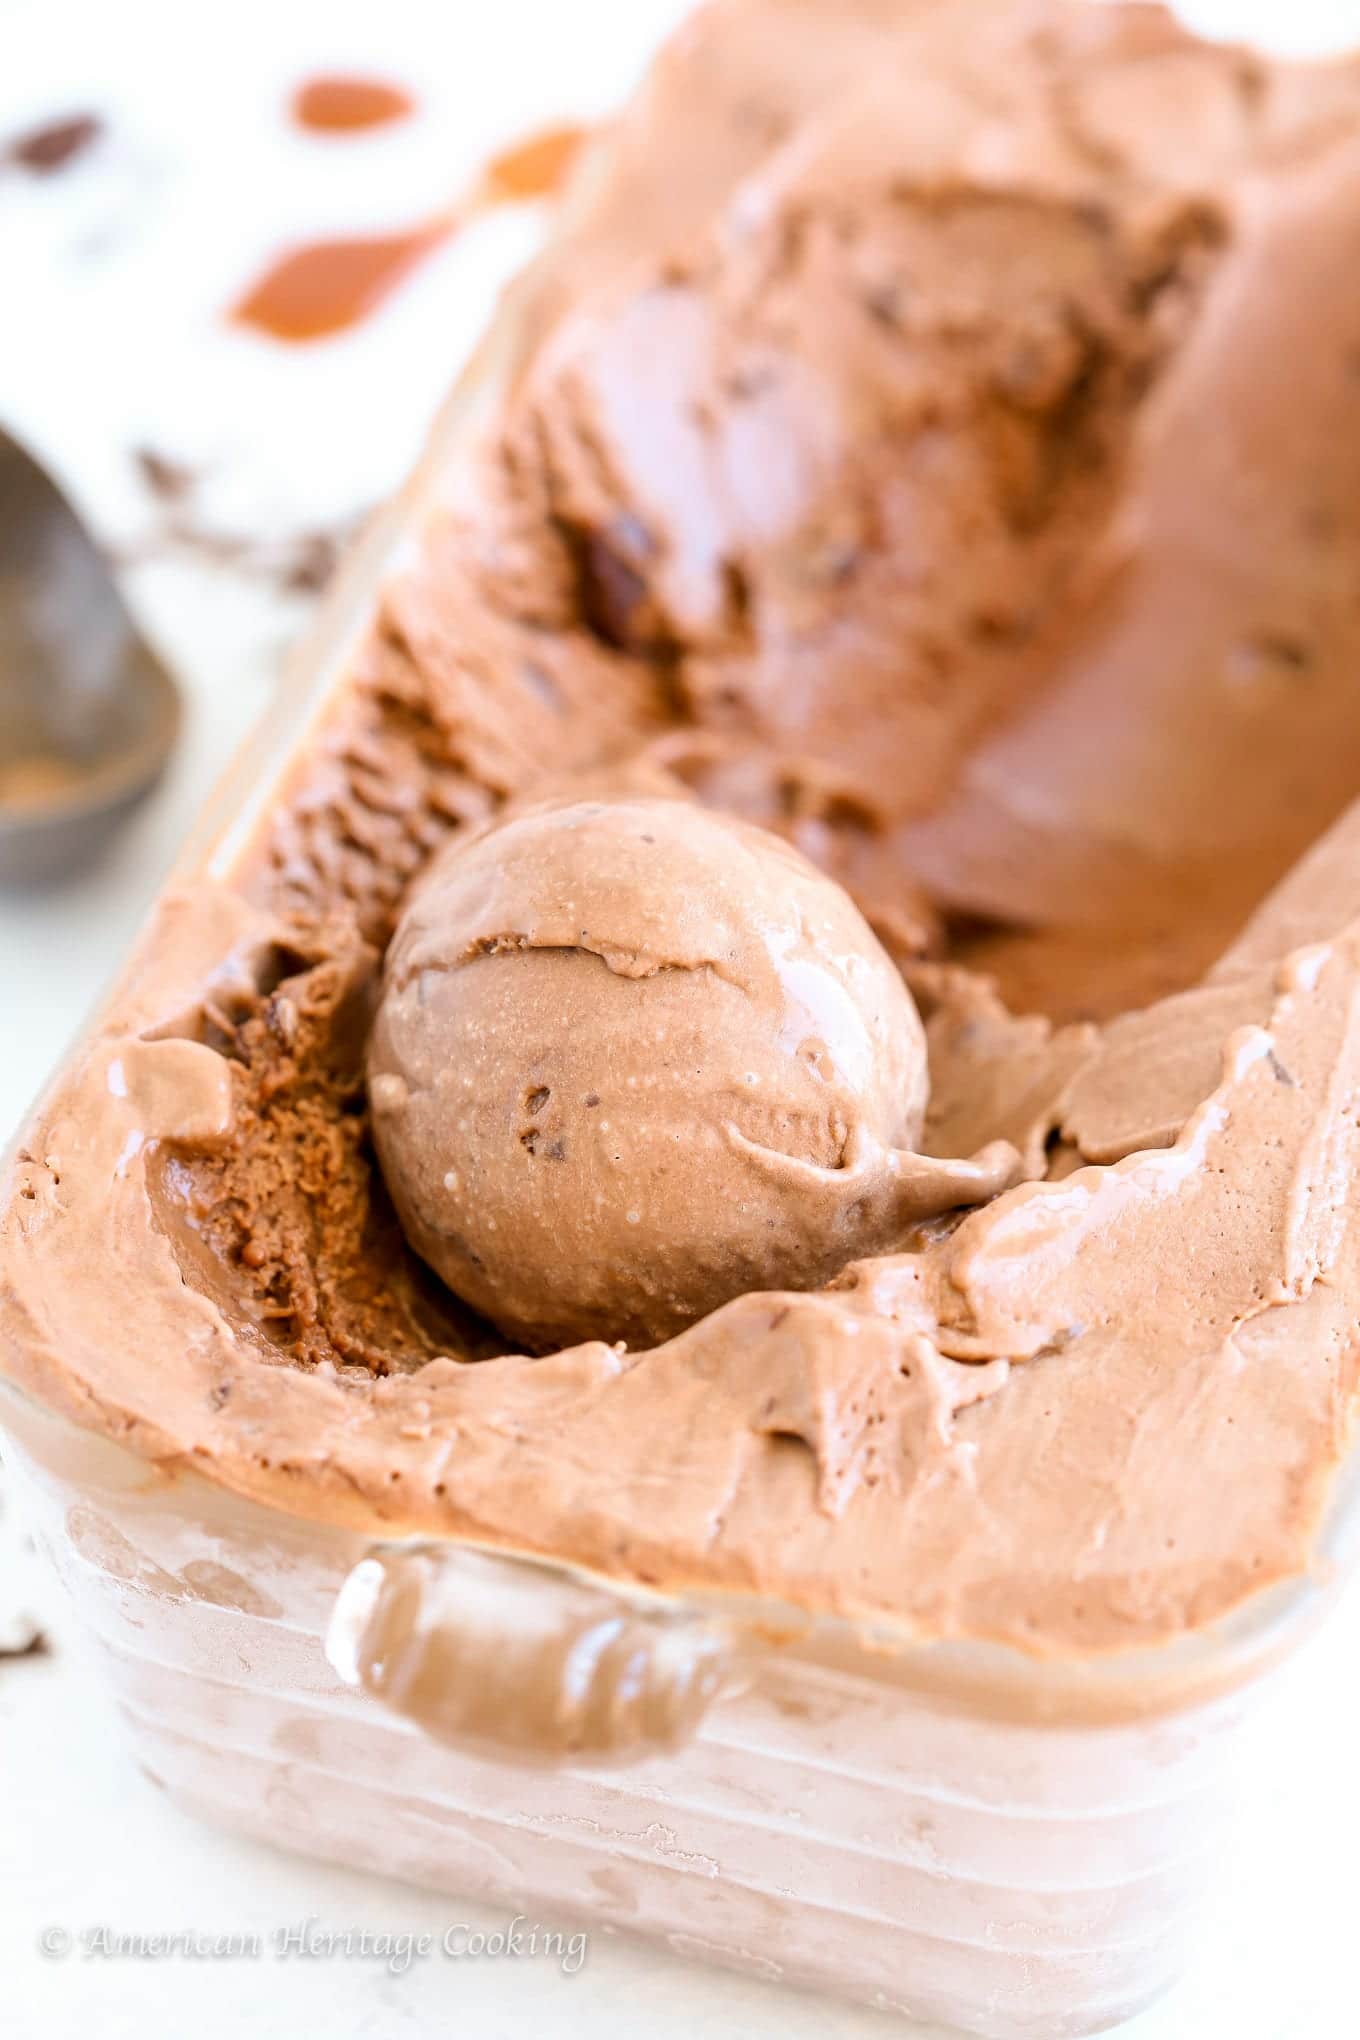 This Double Chocolate Caramel Ice Cream is deeply chocolatey, sinfully rich and 100% decadent. There is caramel sauce in the ice cream and swirled throughout like a silky caramel river with little bits of chopped chocolate taking it to the next level.